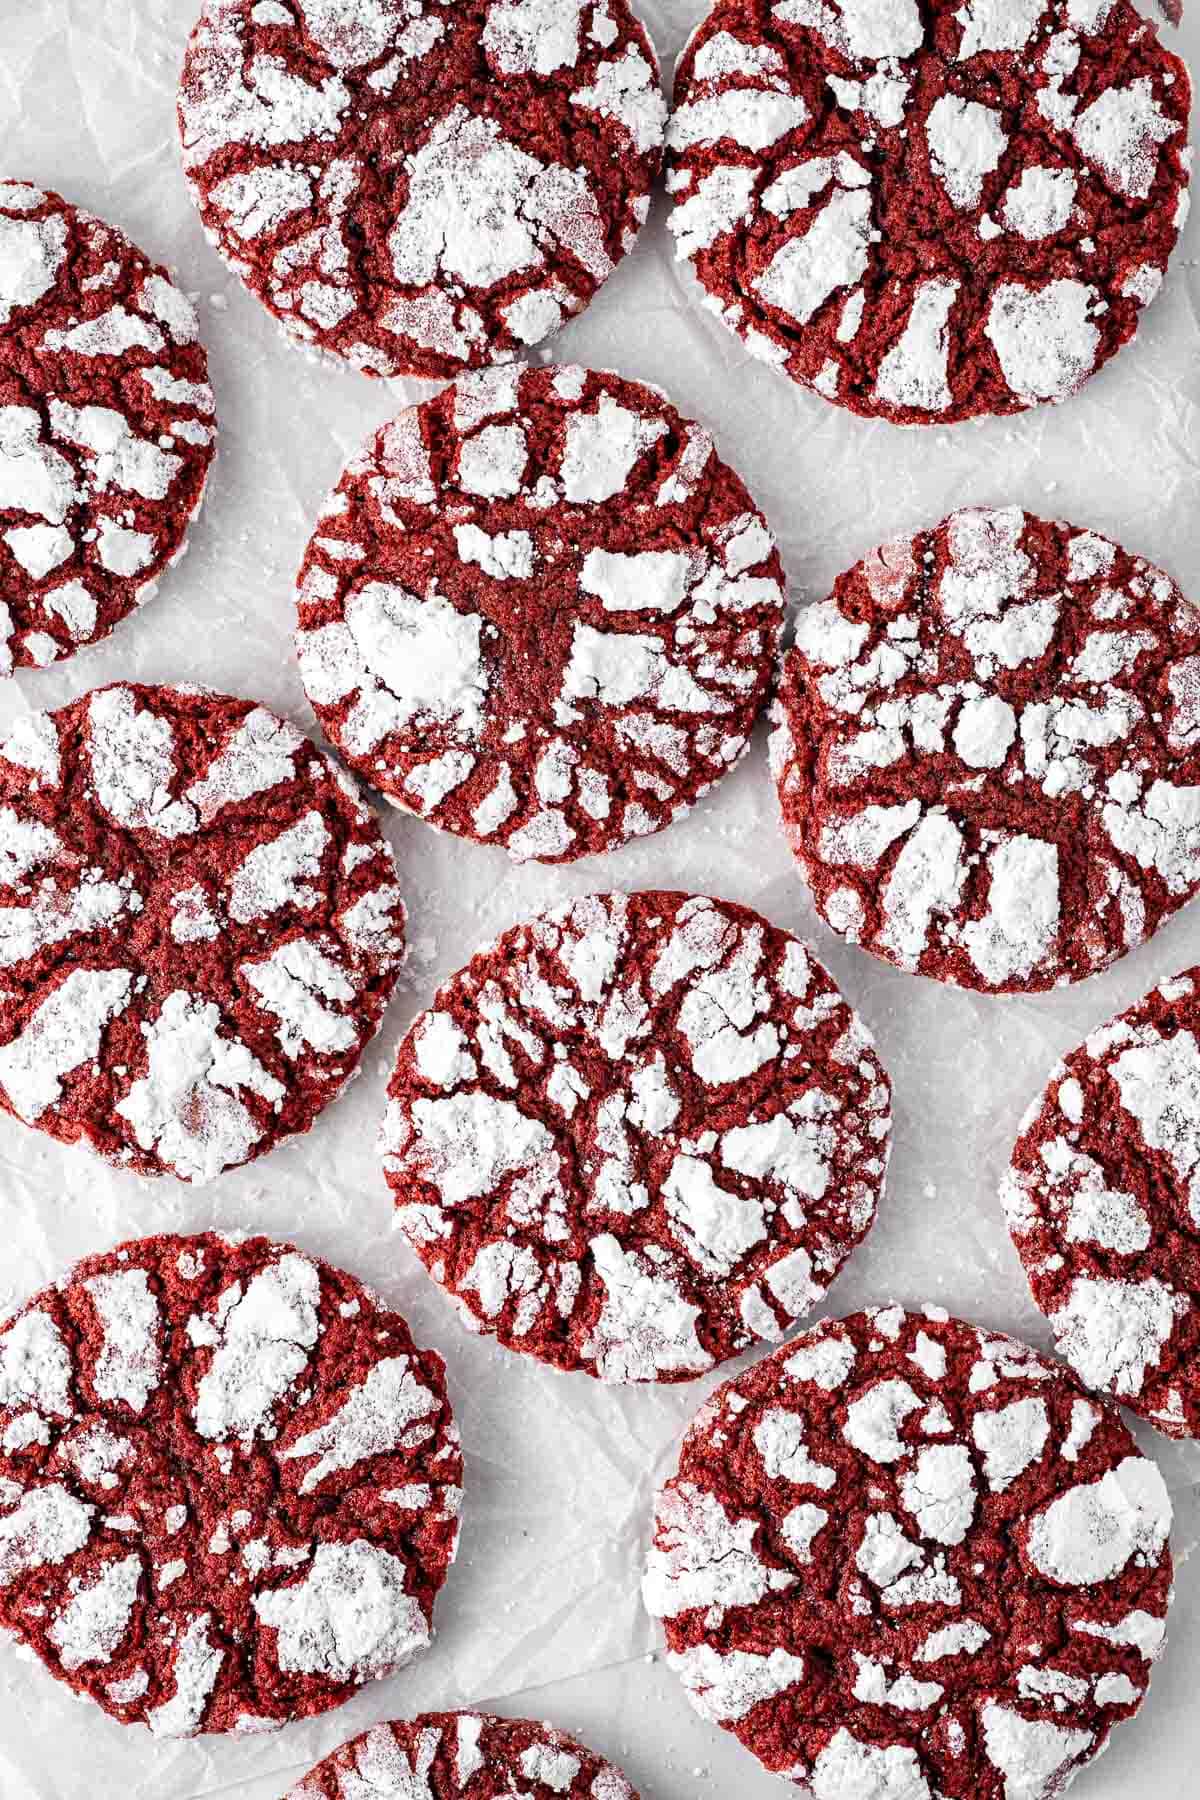 Red velvet crinkle cookies from above.